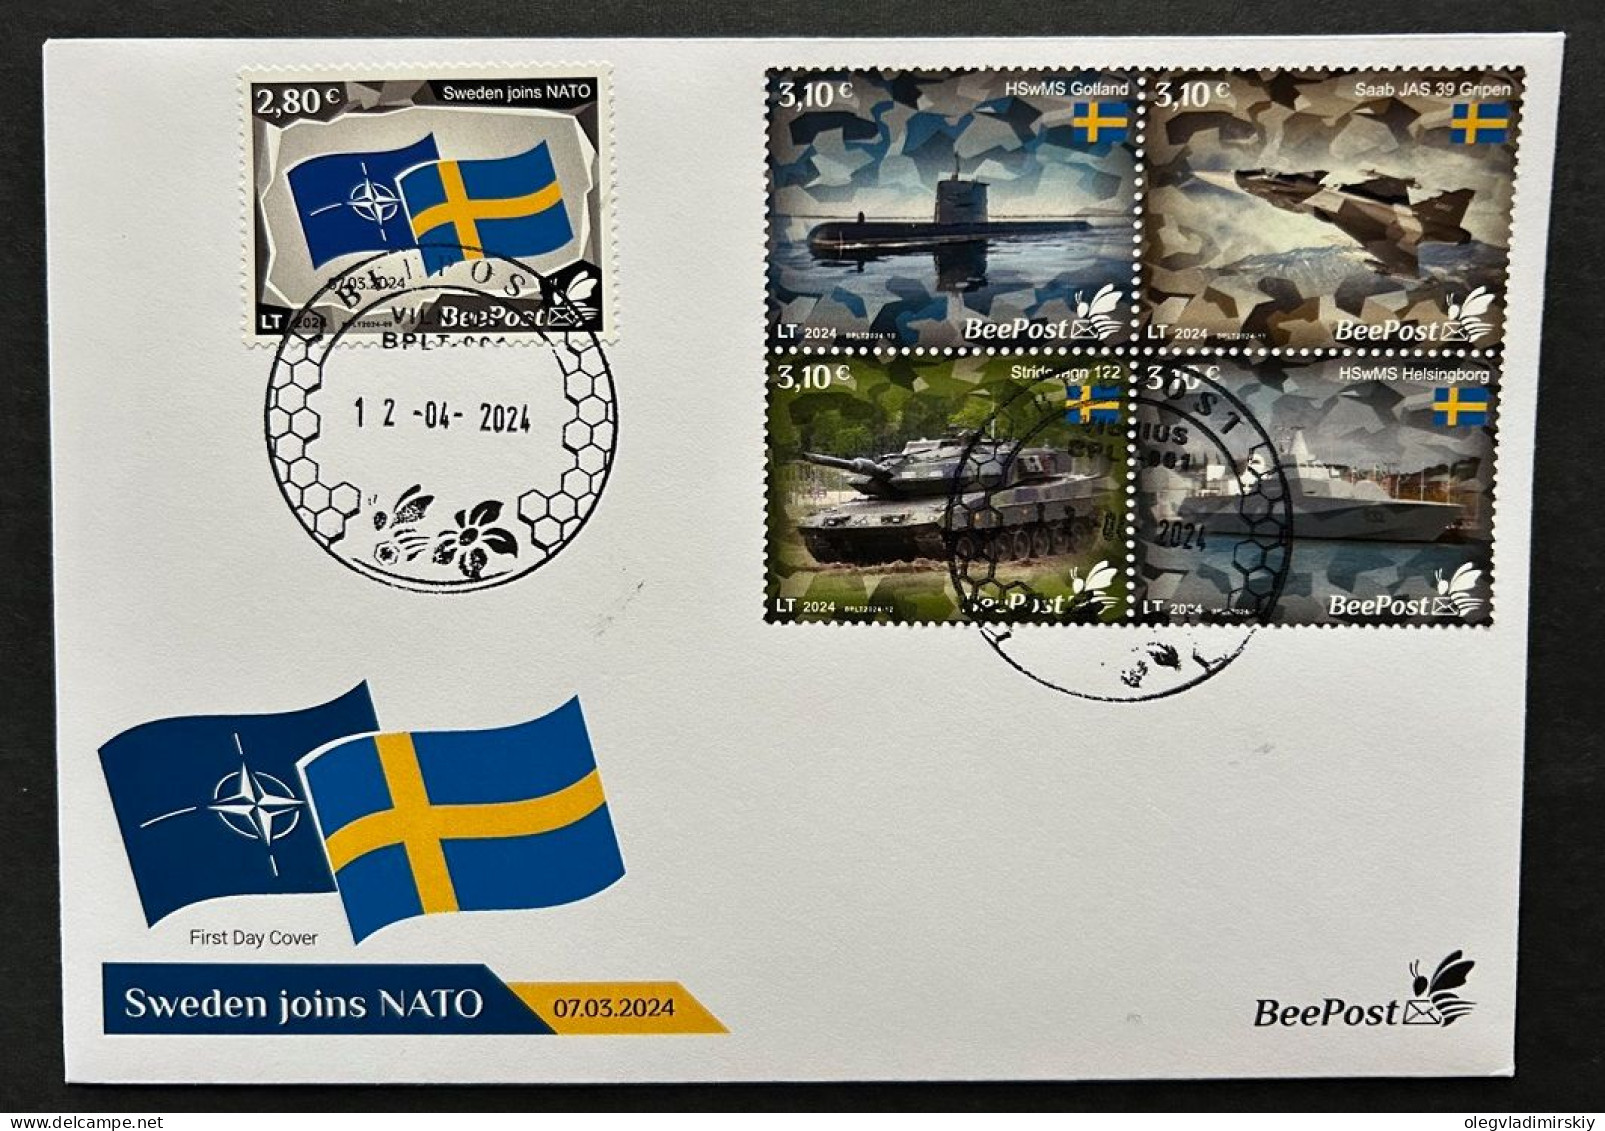 Lithuania 2024 Baltic - NATO Sea Sweden Joins NATO Tank Submarine Warship Airplane Flags BeePost Set Of 5 Stamps FDC - Submarines